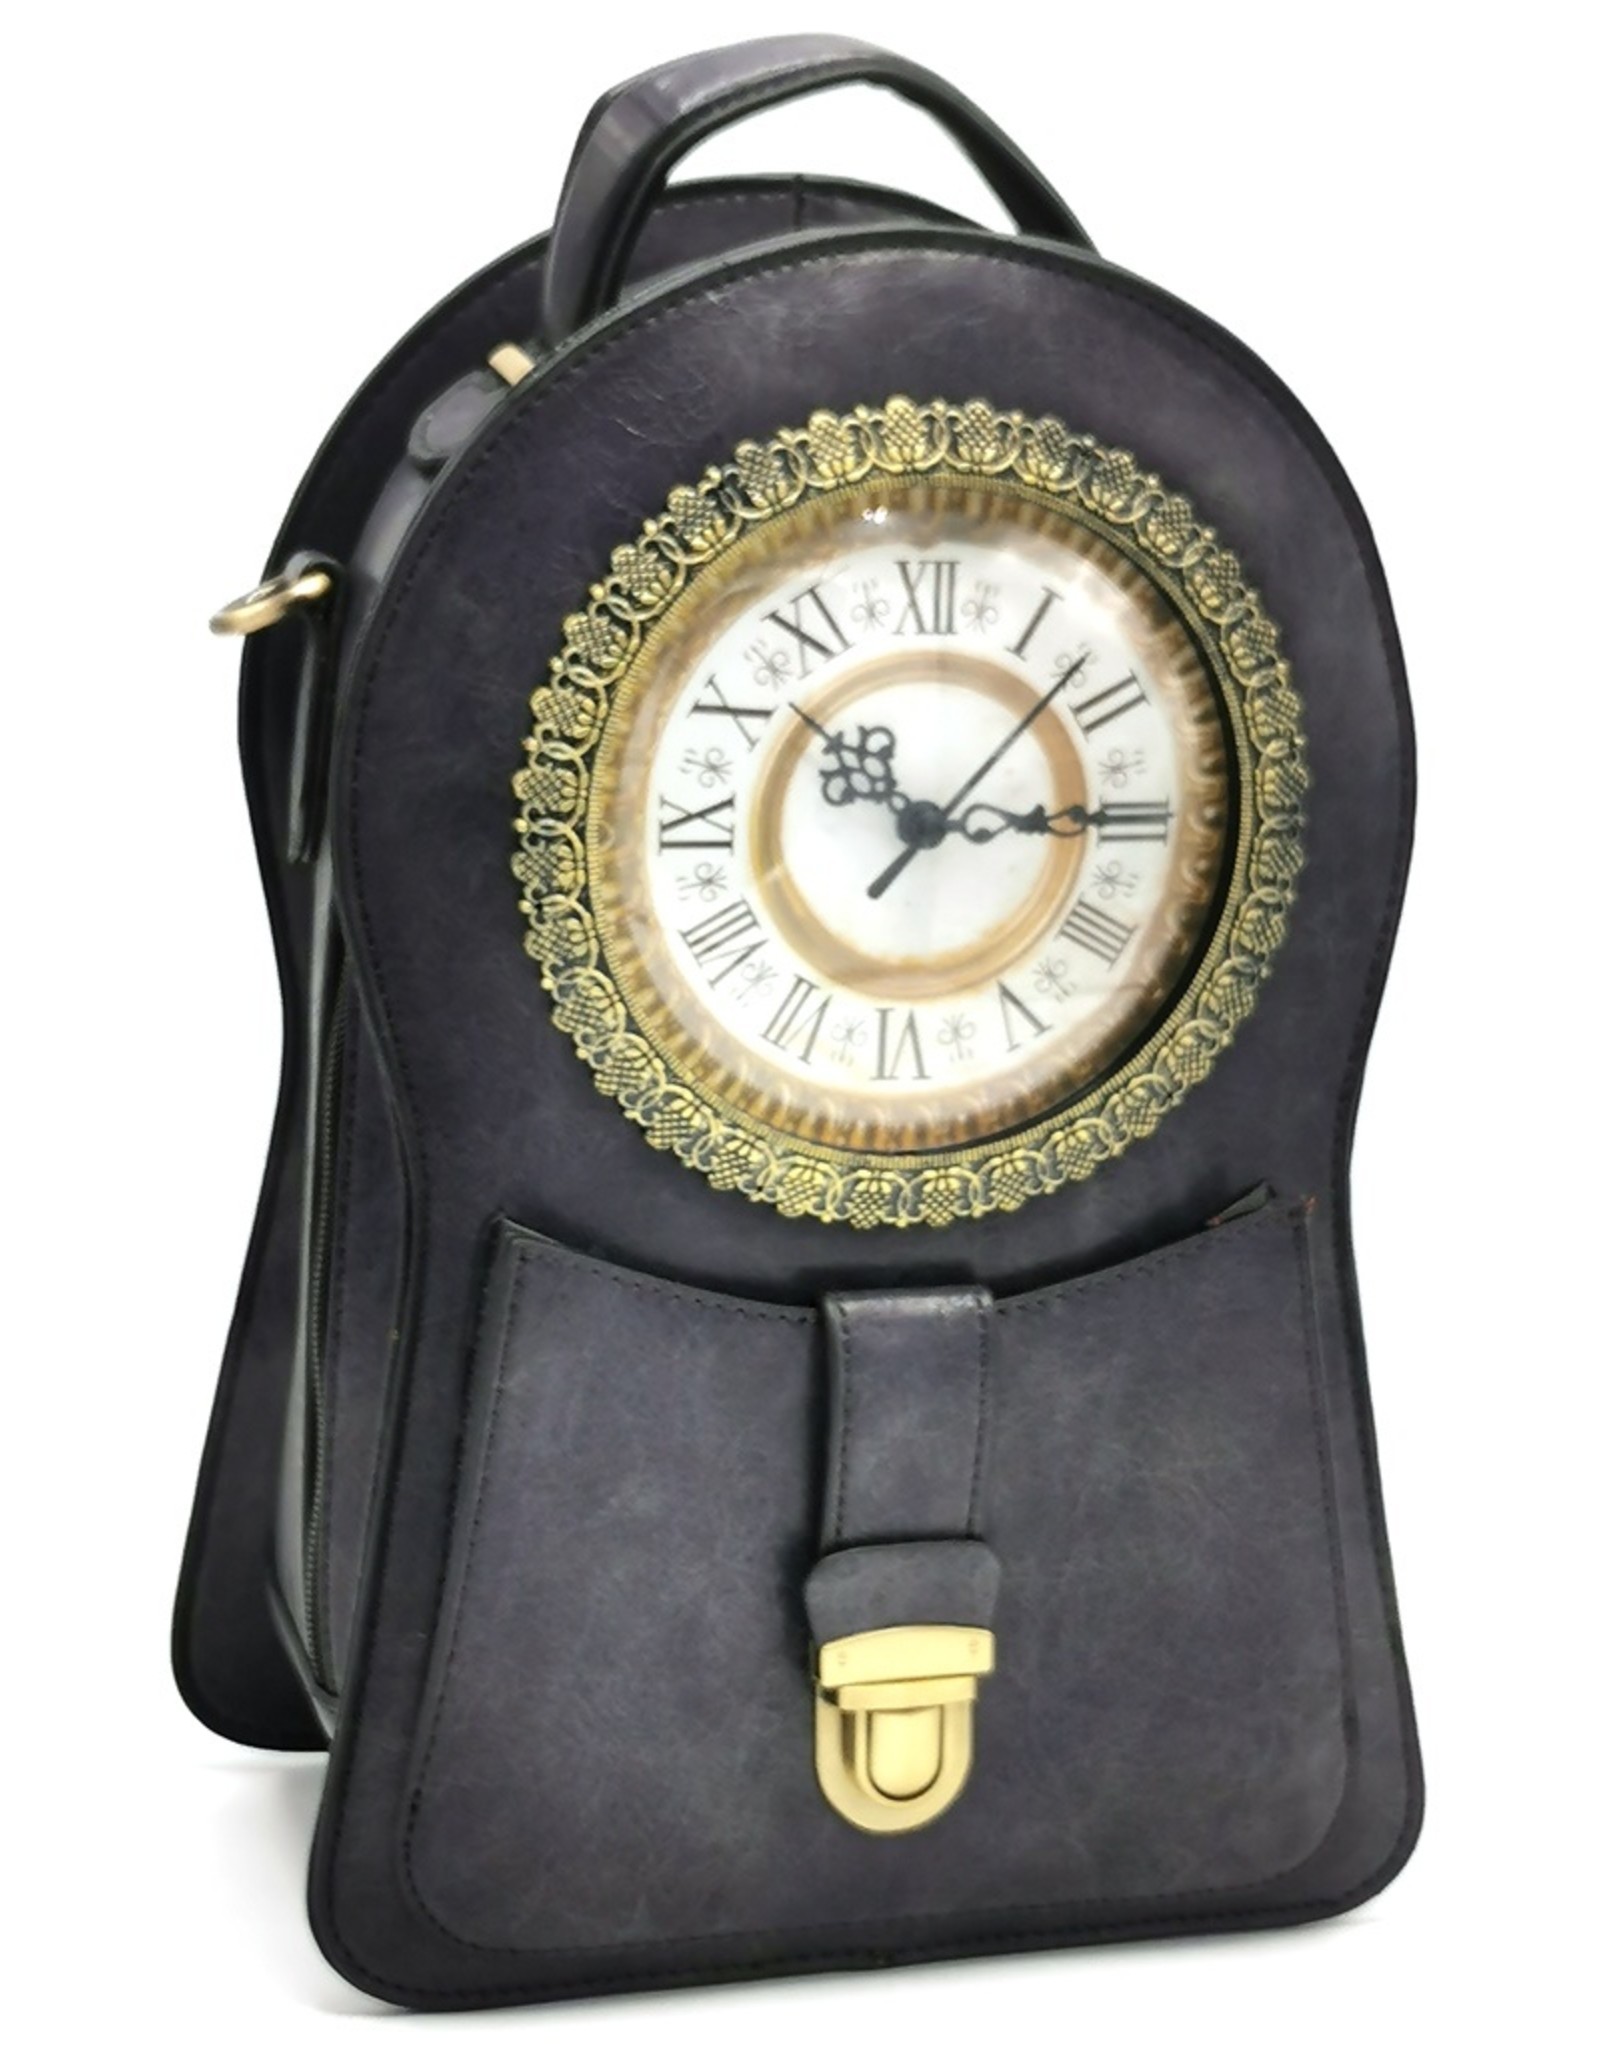 Magic Bags Steampunk bags Gothic bags - Backpack- Schoulder bag with Real Clock grey